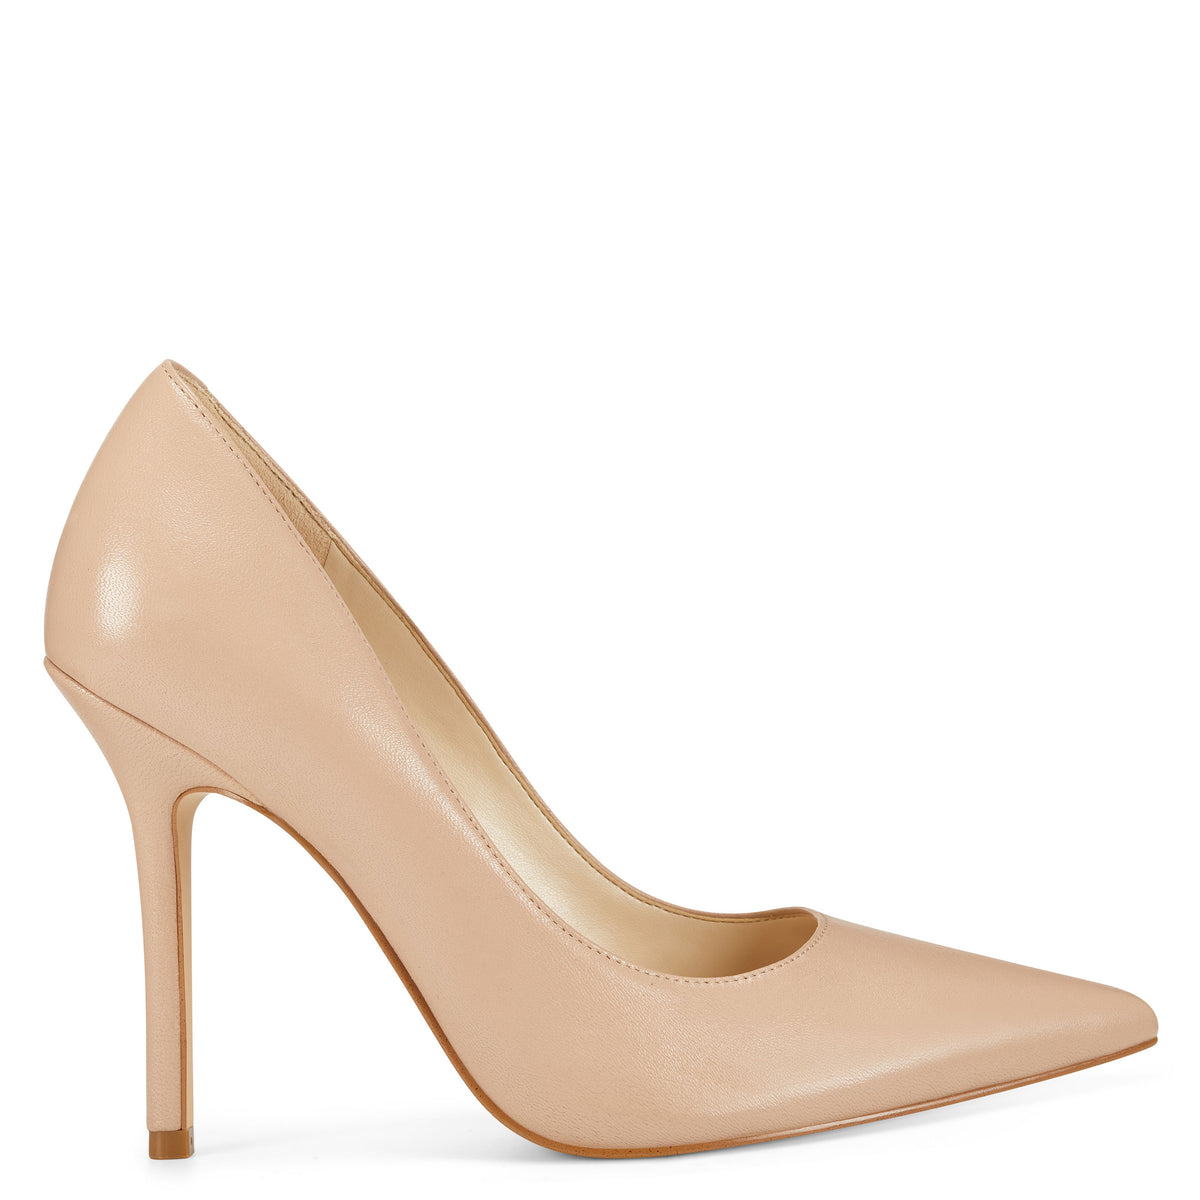 bliss-pointy-toe-pumps-in-light-natural-leather